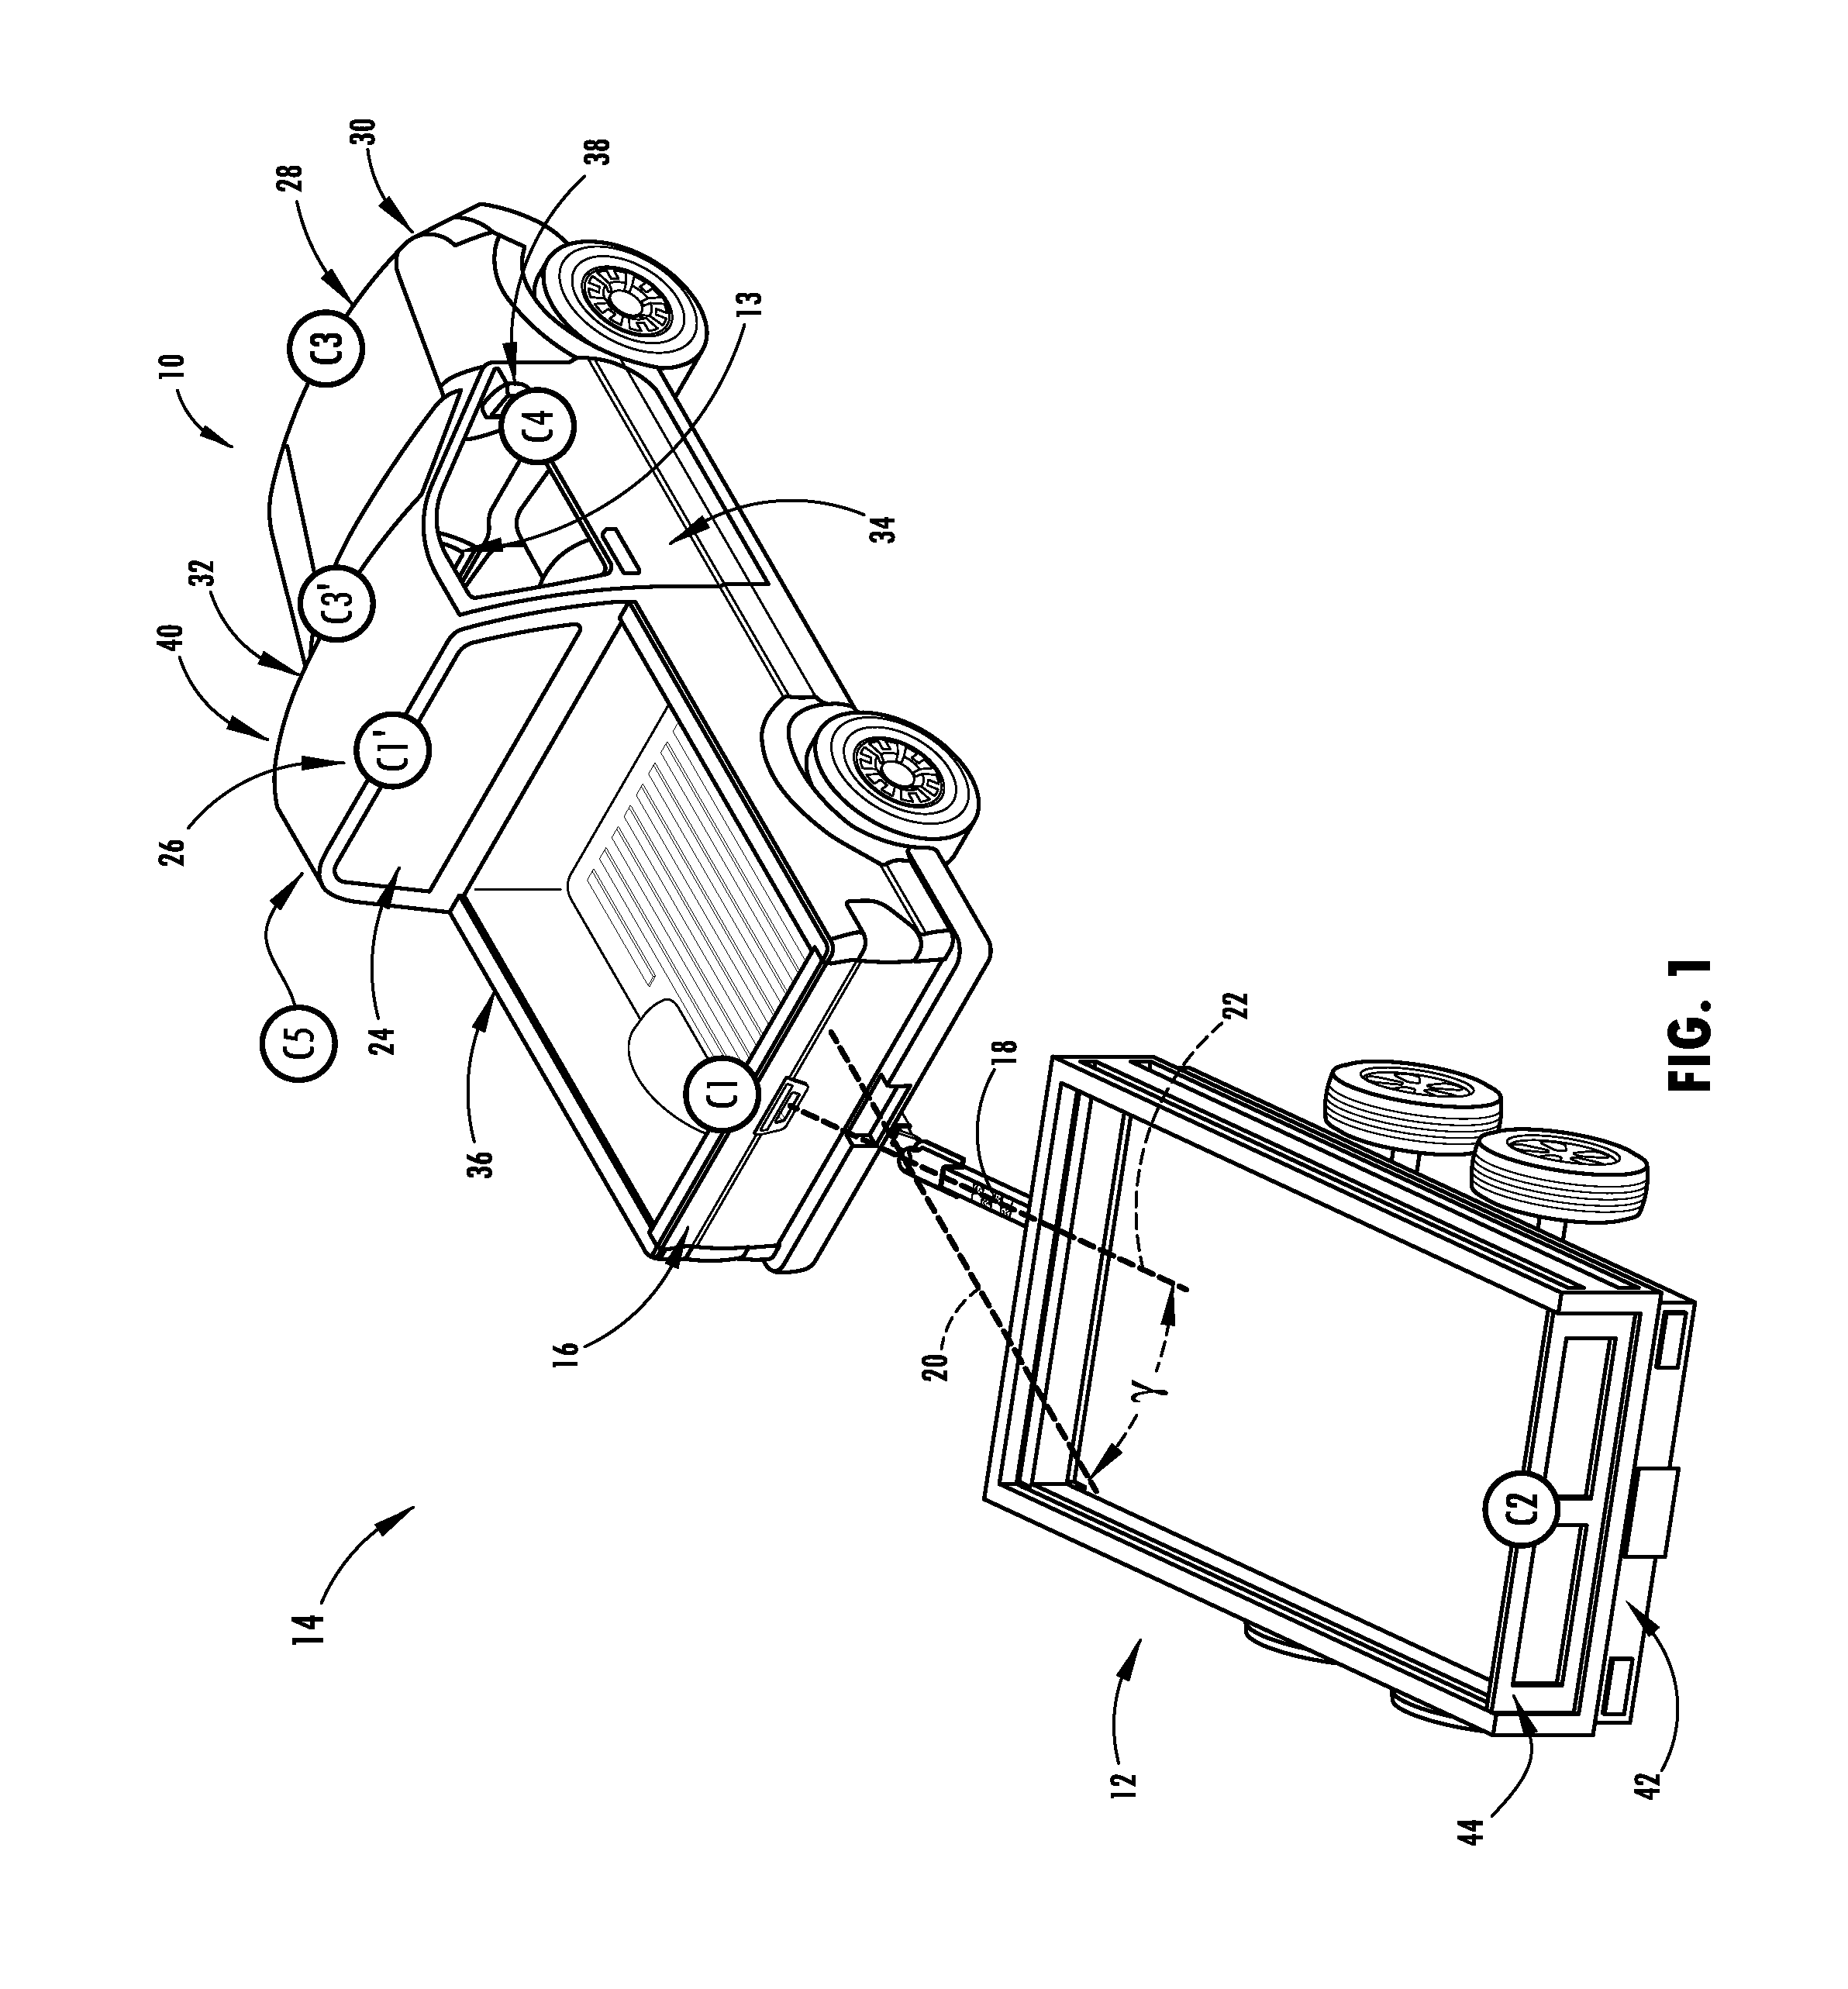 Method of inputting a path for a vehicle and trailer